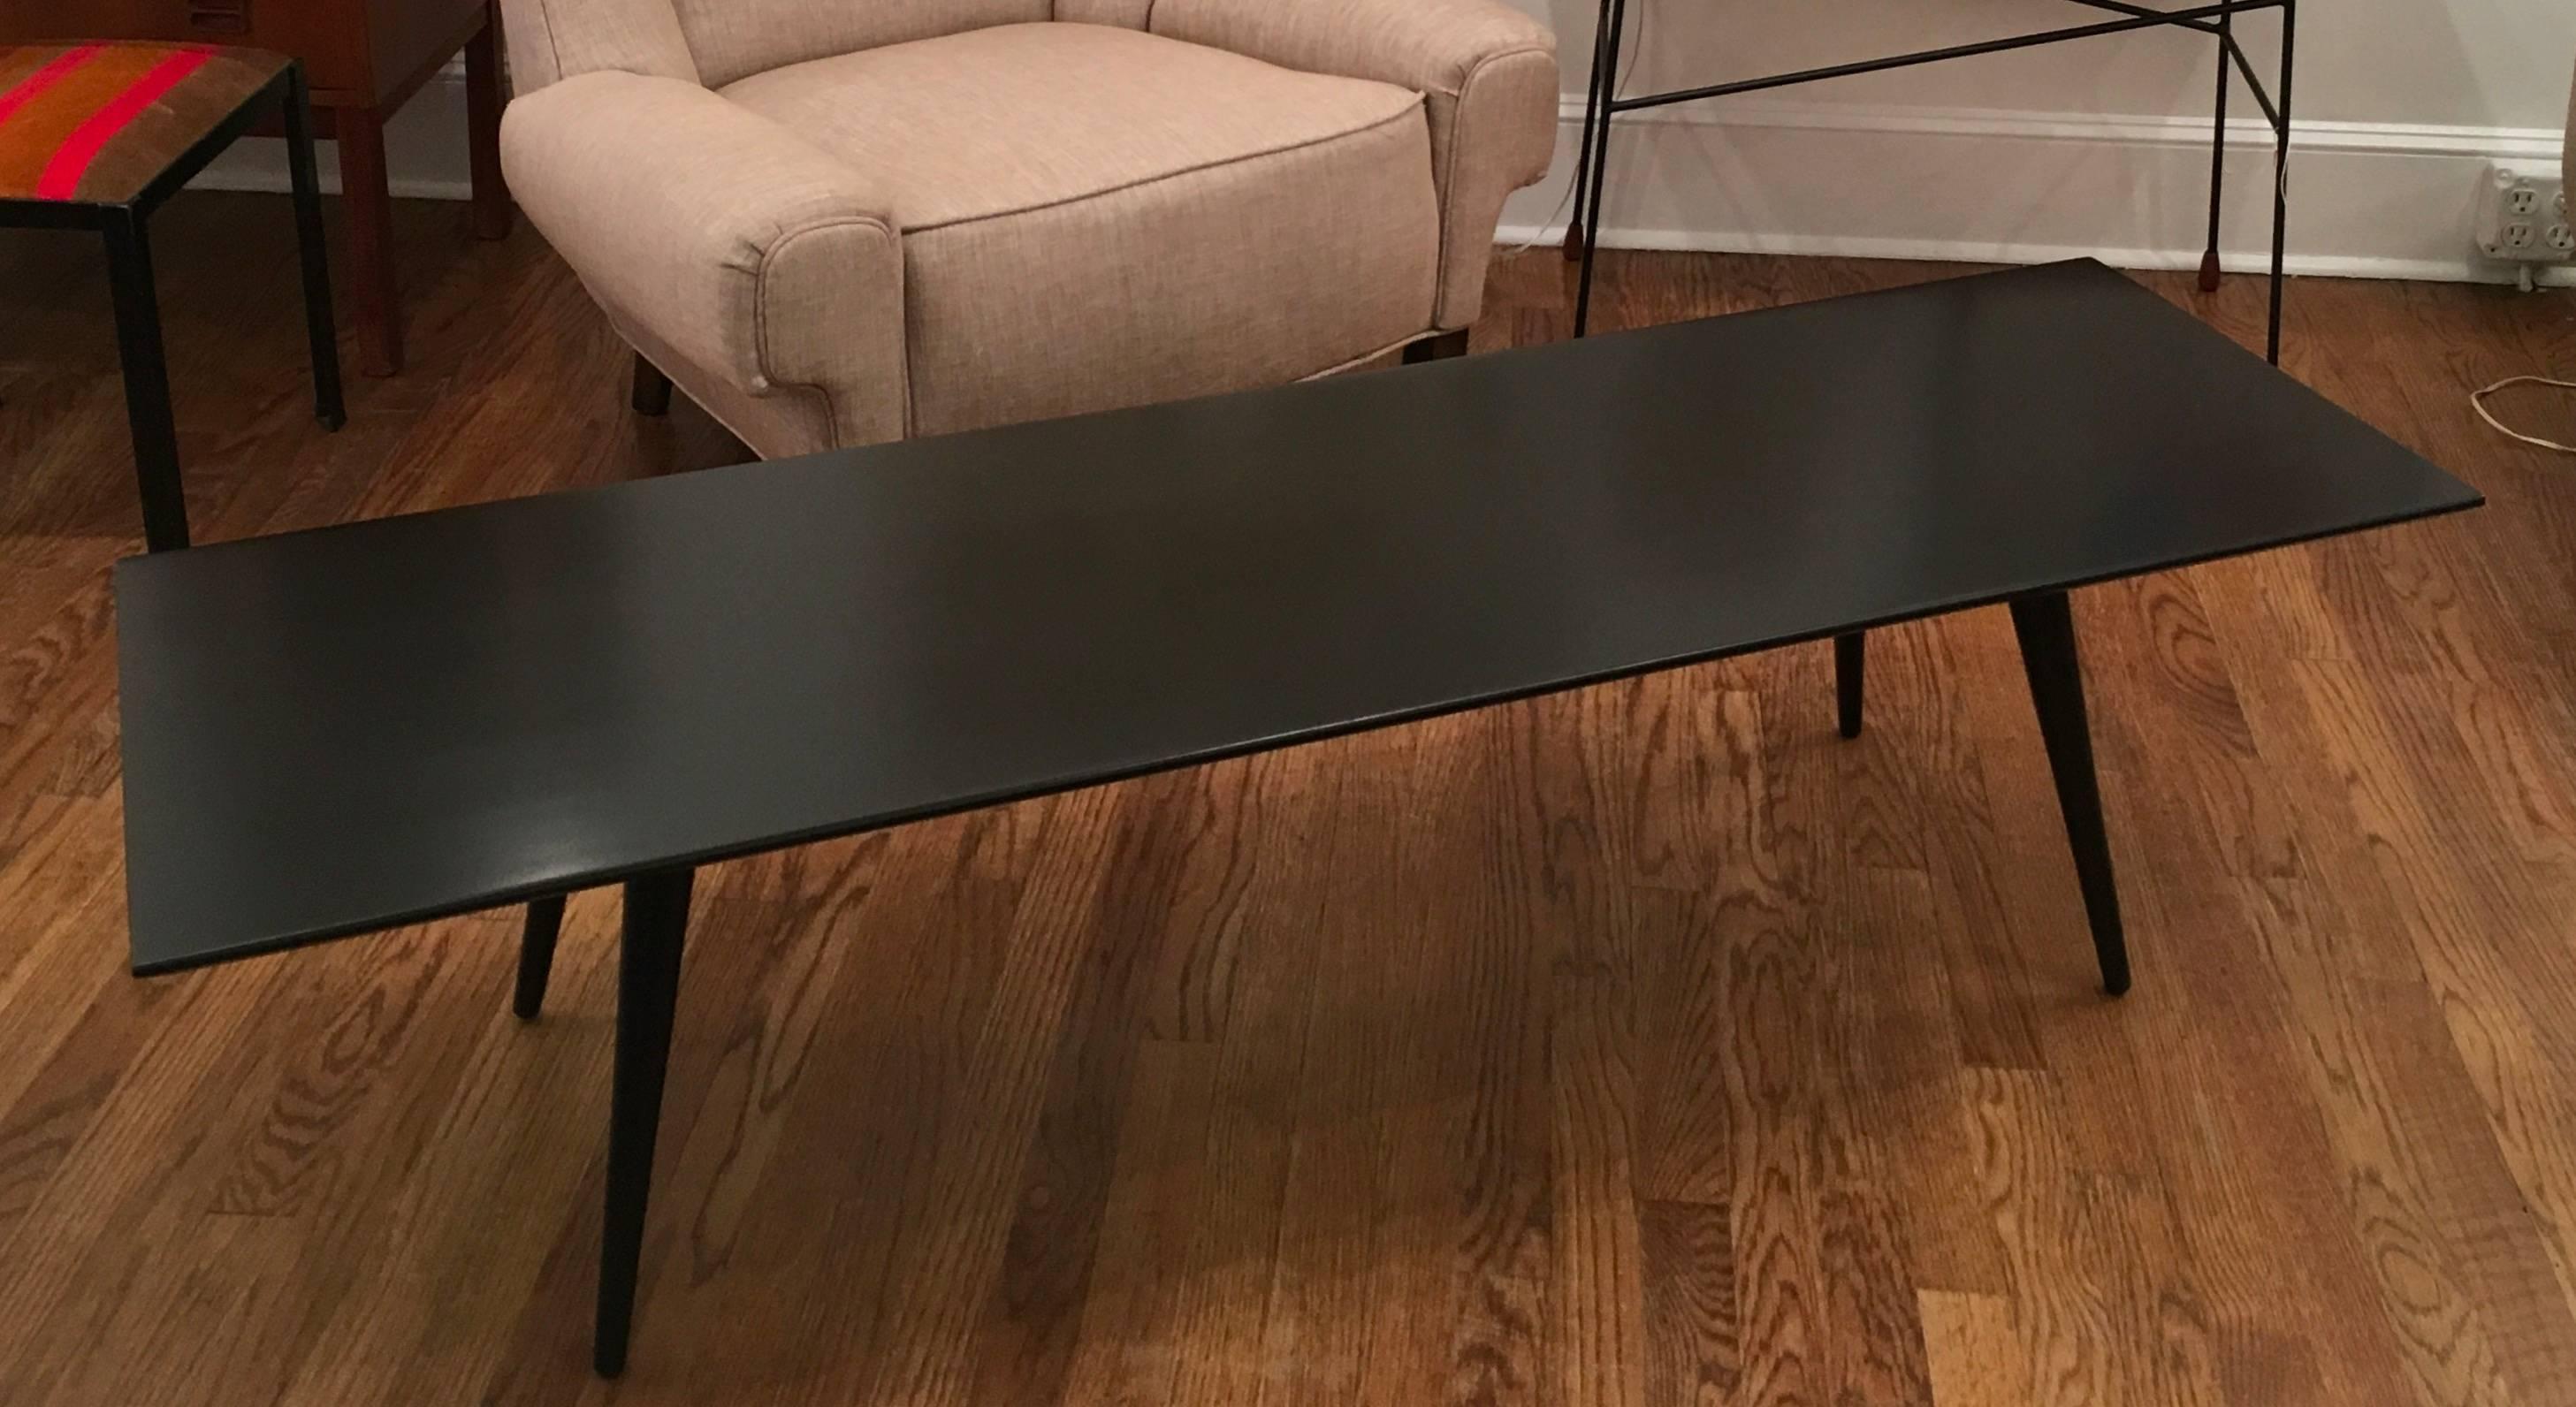 This iconic coffee table was designed by Paul McCobb as part of his Planner Group series. The solid wood table has recently been refinished matching it's original semi gloss black finish.